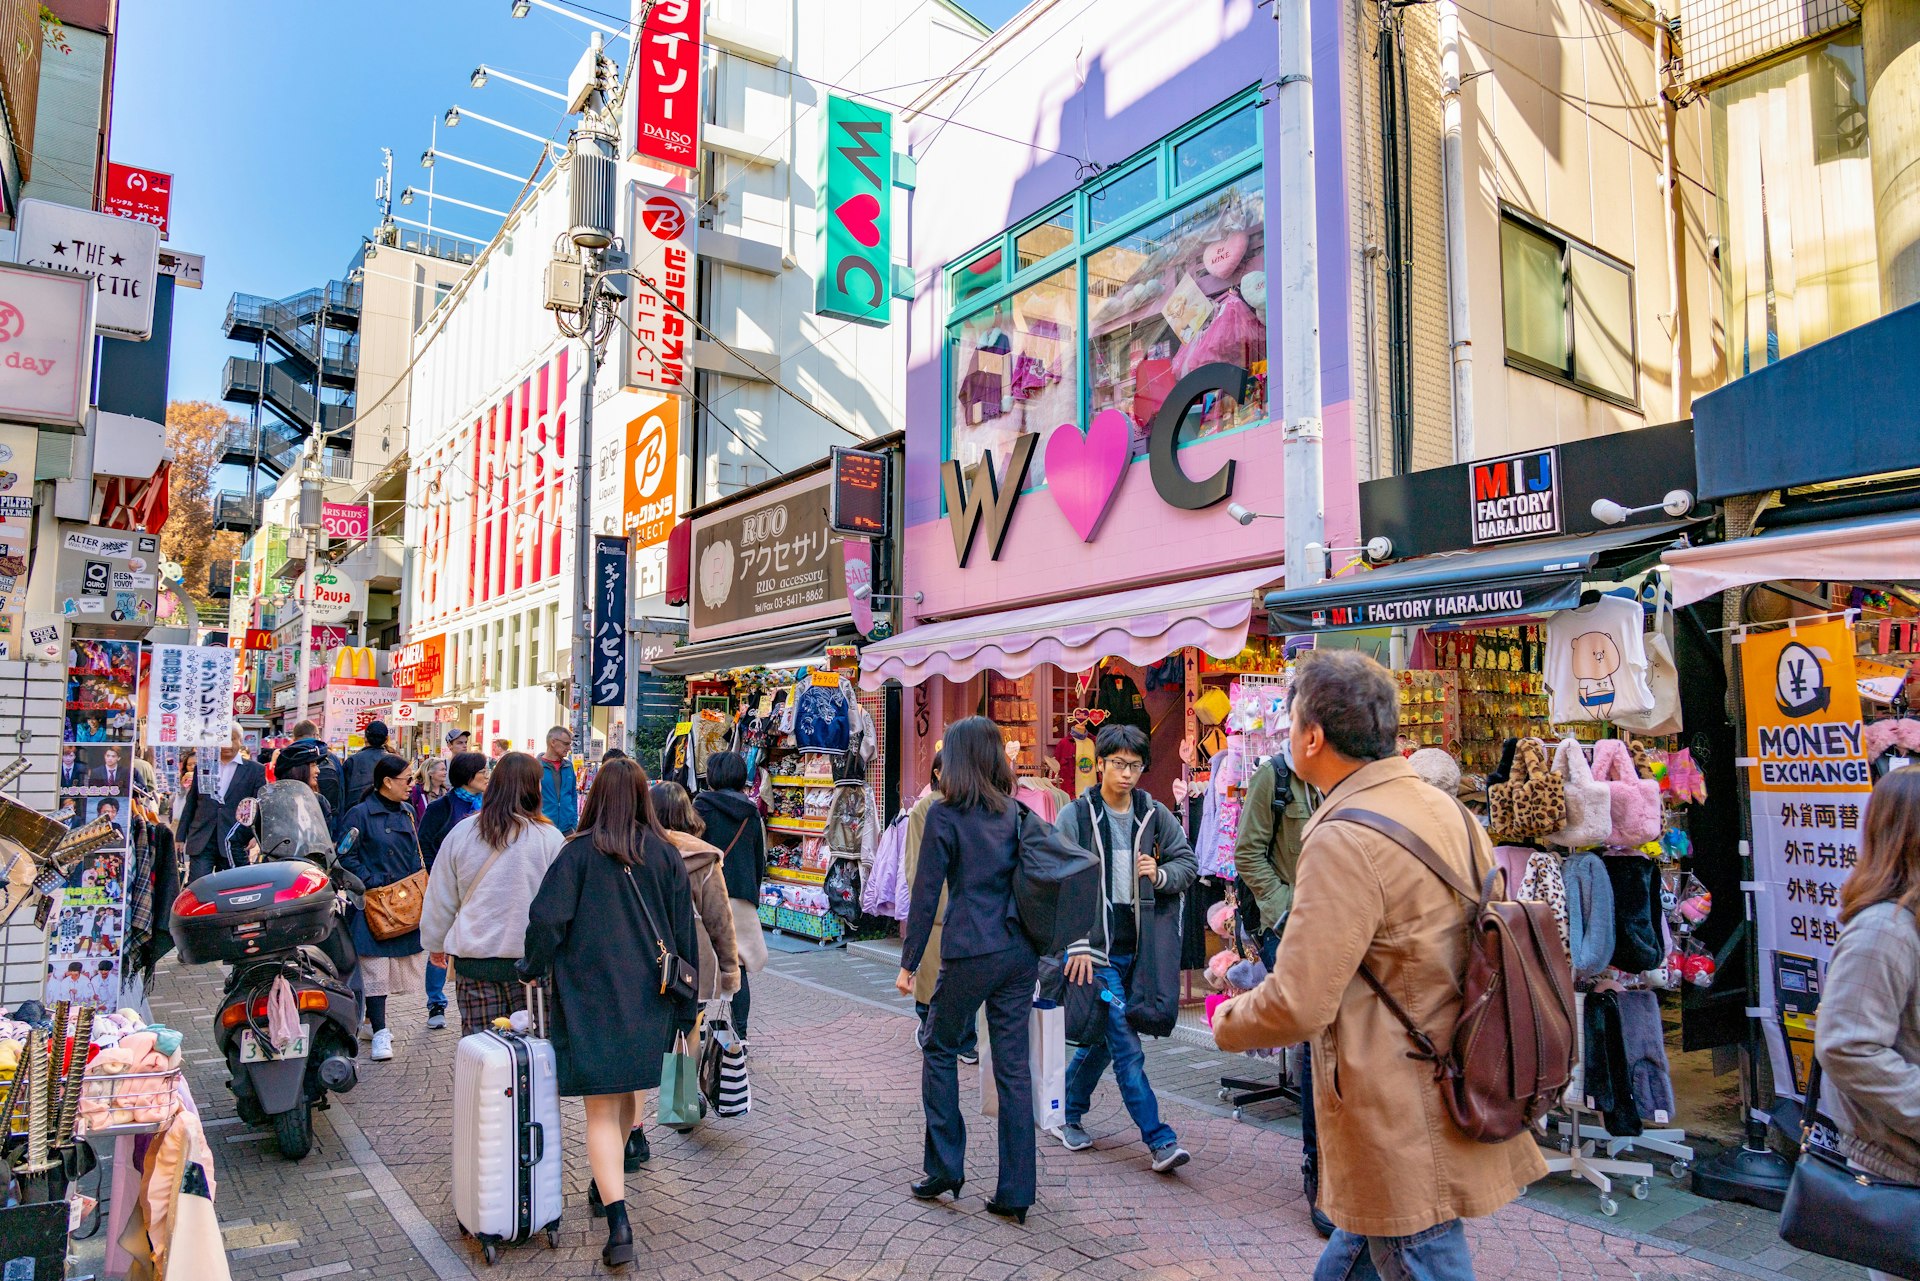 A side-on view of Takeshita-dori: a pedestrian shopping street lined with fashion boutiques, cafes and restaurants. Many people walk along through the streets, browsing the shops as they go, while above their heads, signs for various businesses protrude from the walls.